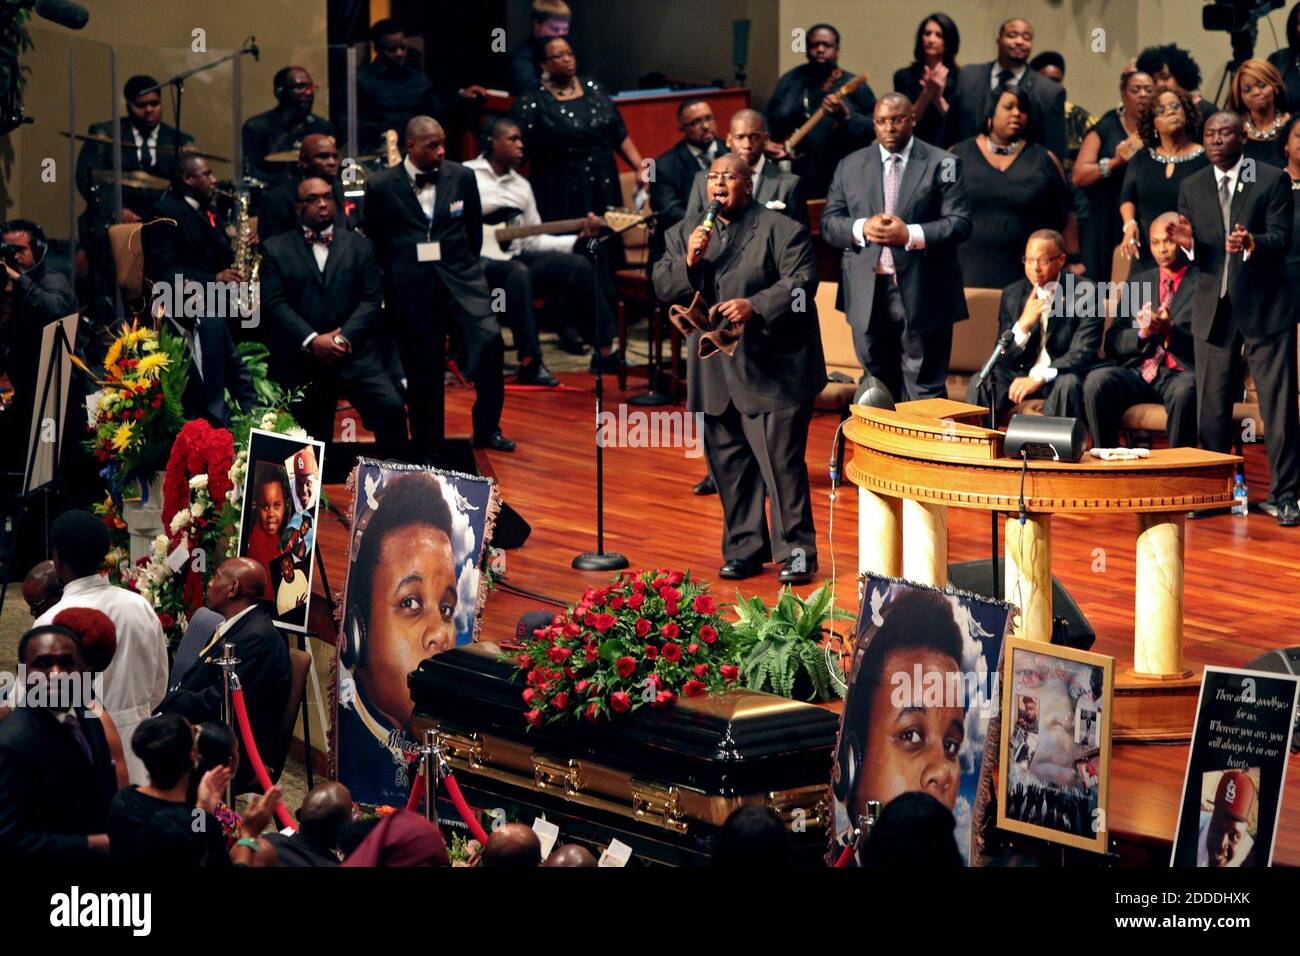 NO FILM, NO VIDEO, NO TV, NO DOCUMENTARY - Funeral services for Michael Brown are held on Monday, August 25, 2014, at Friendly Temple Missionary Baptist Church in St. Louis, MO, USA. Michael Brown, 18, was shot and killed by a Ferguson police officer on August 9, 2014. Photo by Robert Cohen/St. Louis Post-Dispatch/MCT/ABACAPRESS.COM Stock Photo